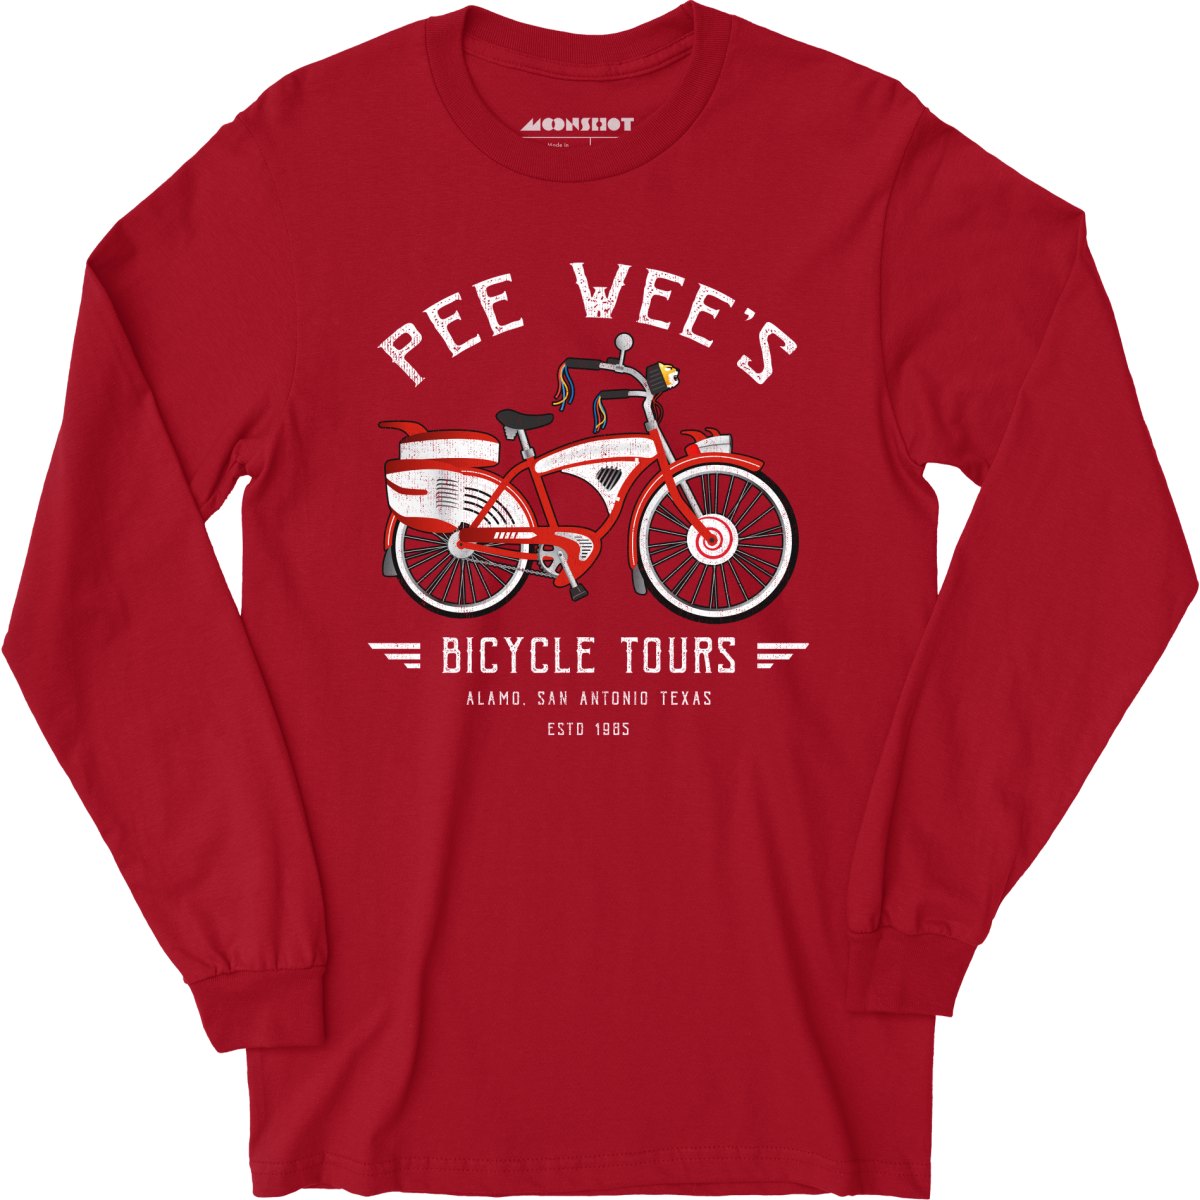 Pee Wee's Bicycle Tours - Long Sleeve T-Shirt